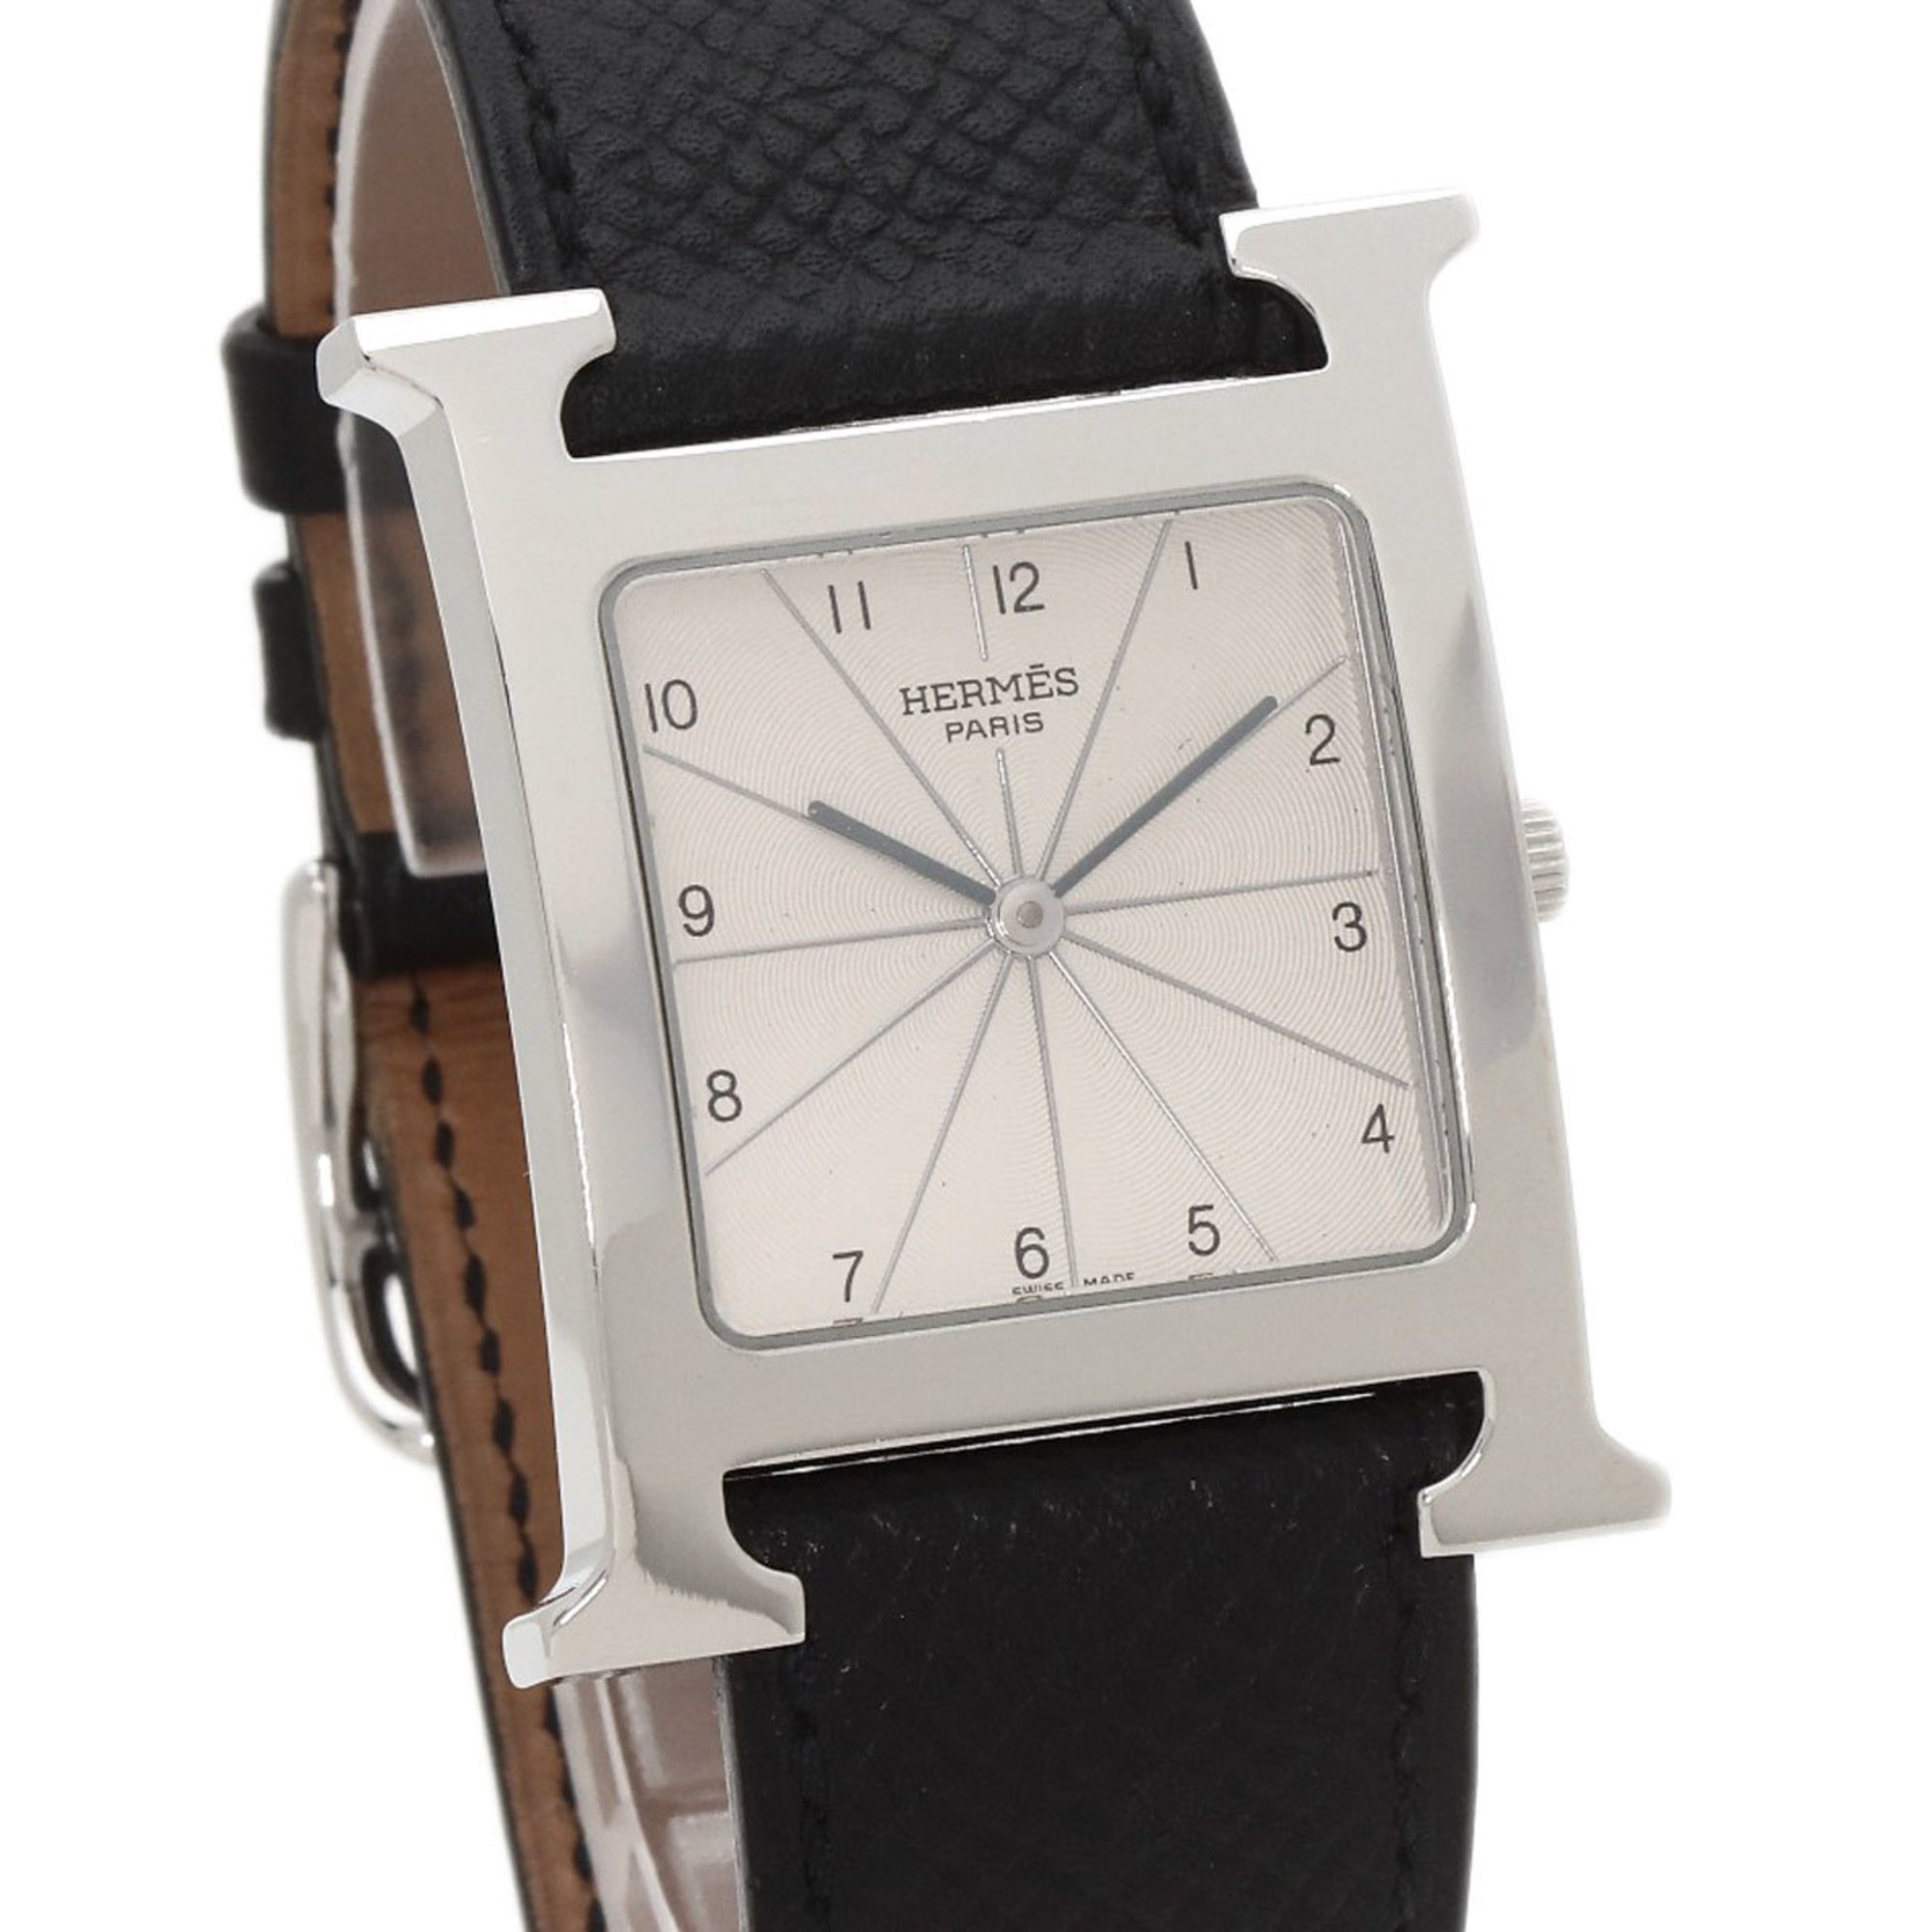 Hermes HH1.710 H Watch Stainless Steel/Leather Men's HERMES